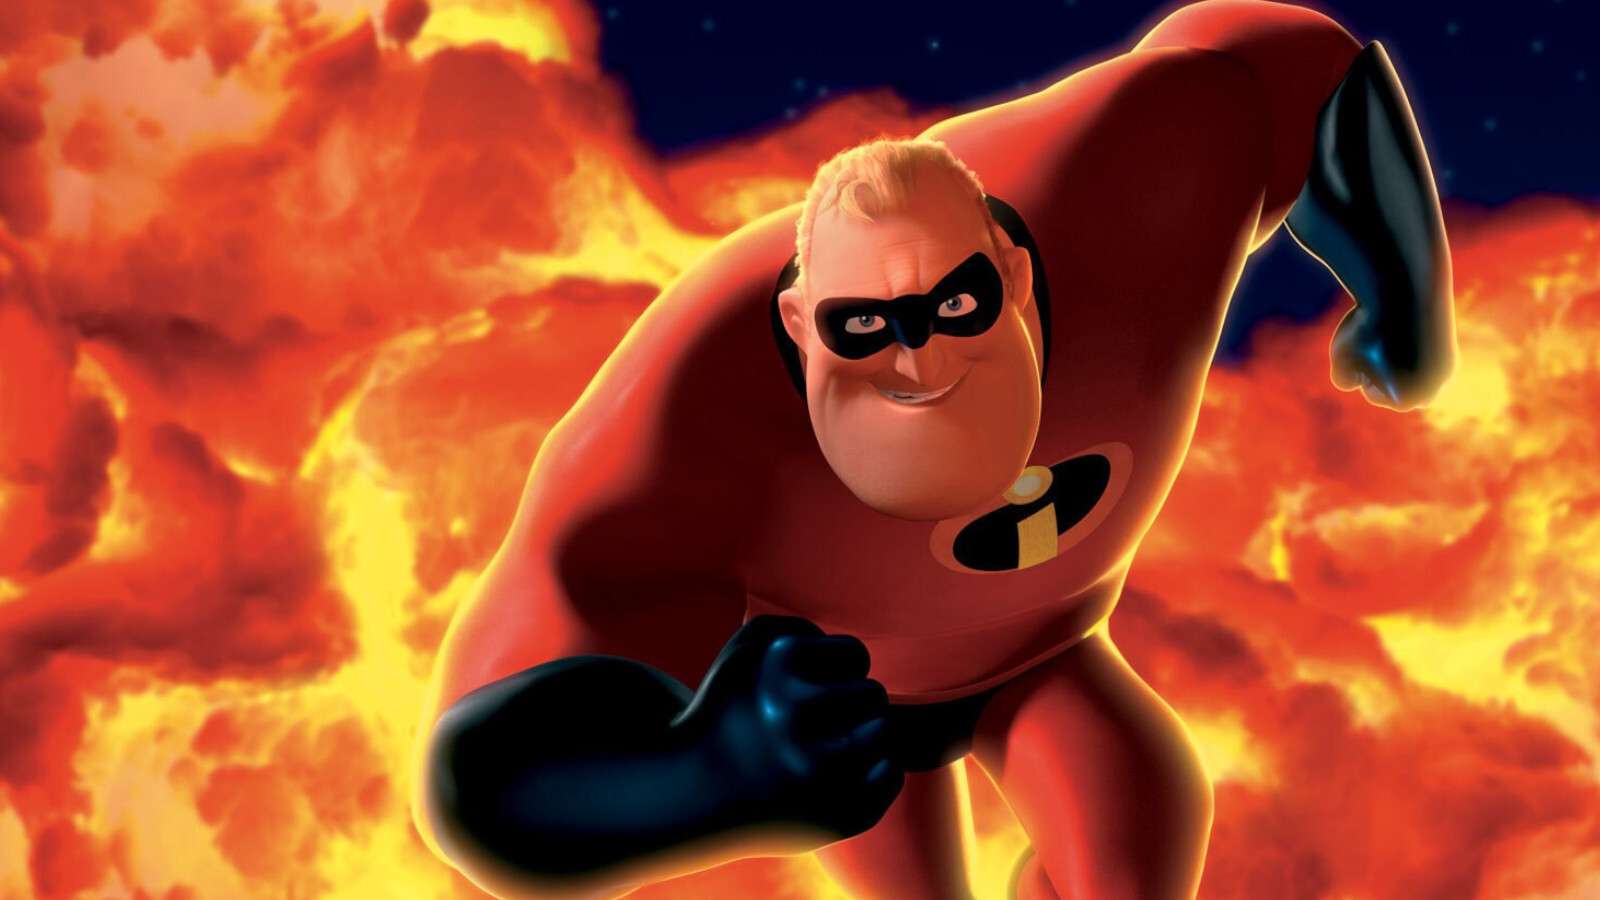 Mr Incredible from the Increidbles